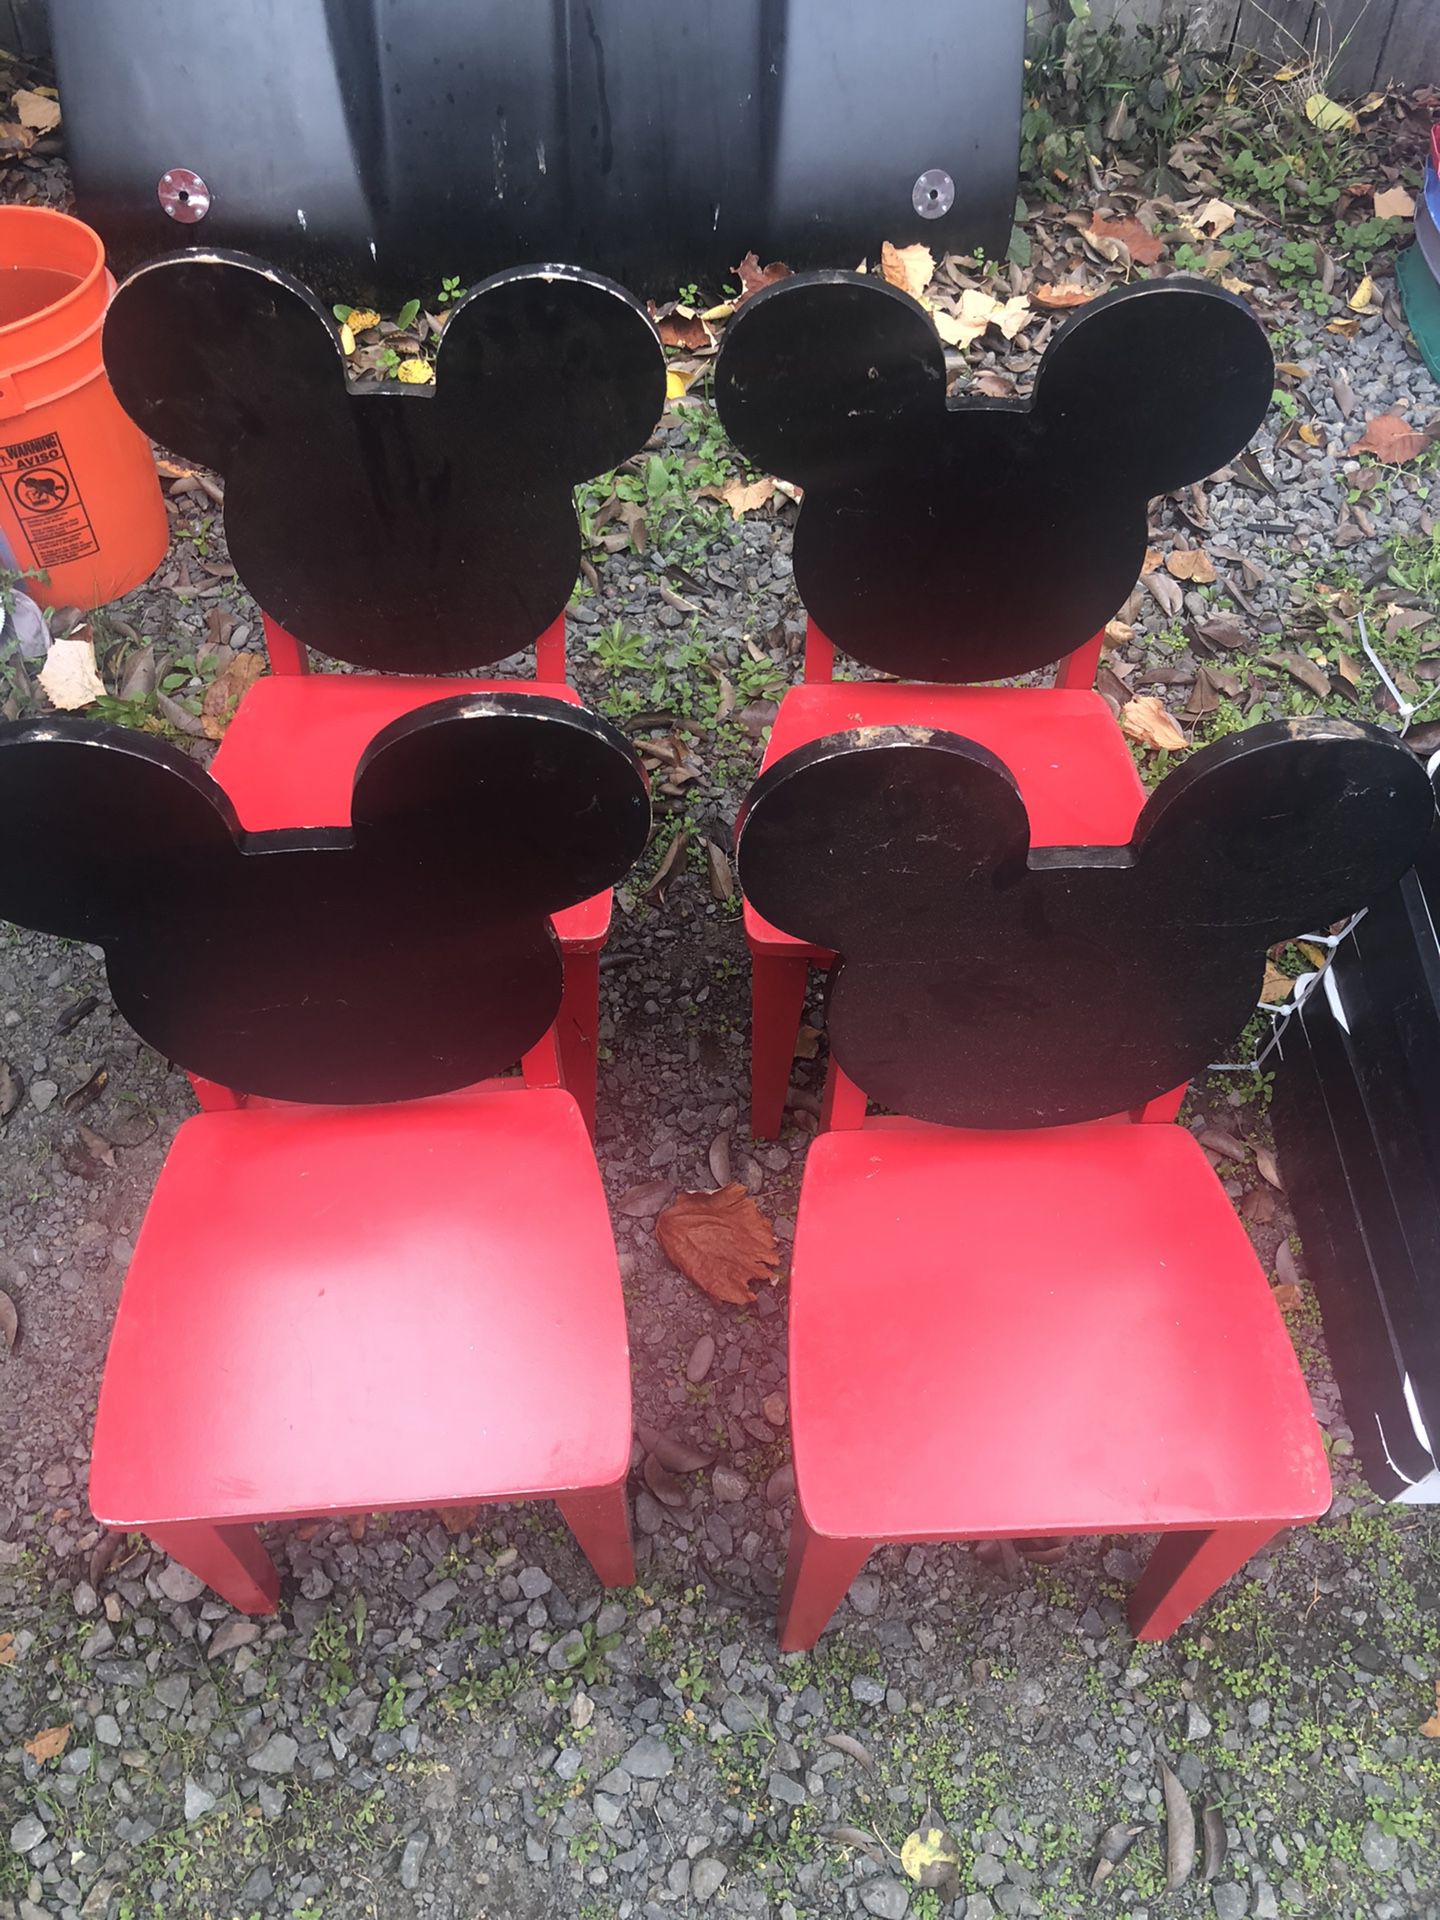 For solid wood Mickey Mouse kids chairs need repainted